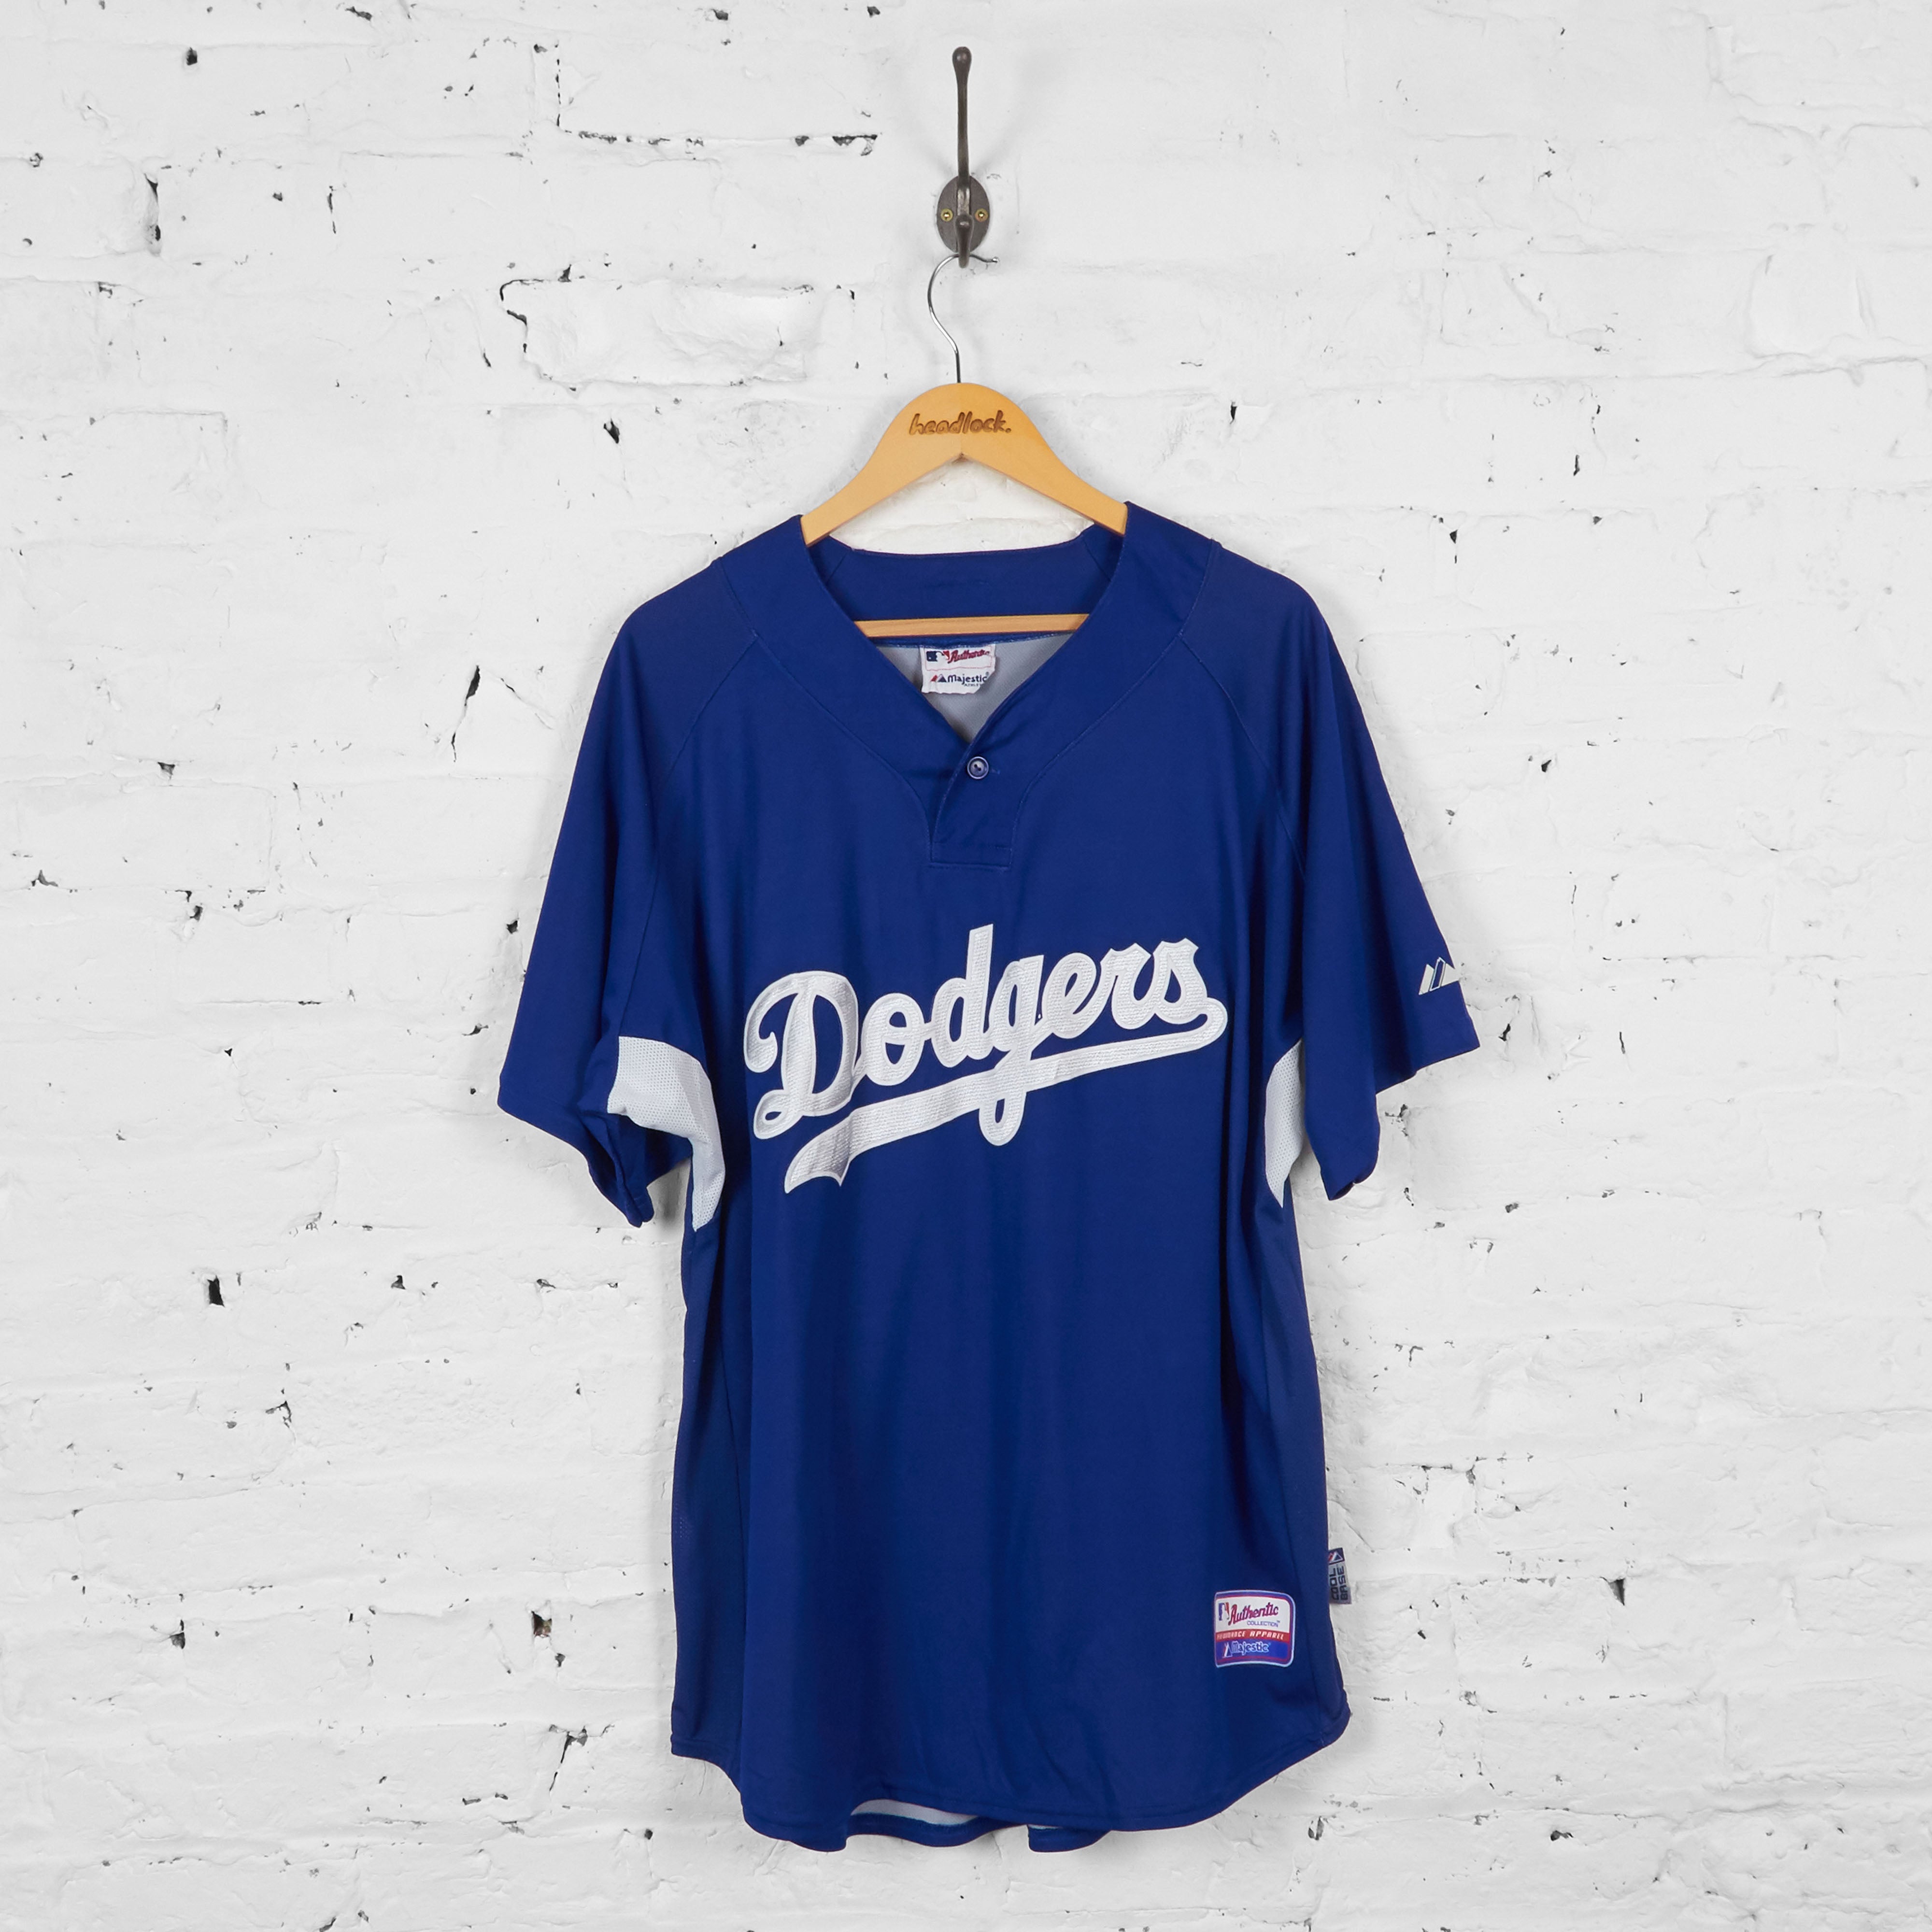 Will they sell this jersey? : r/Dodgers